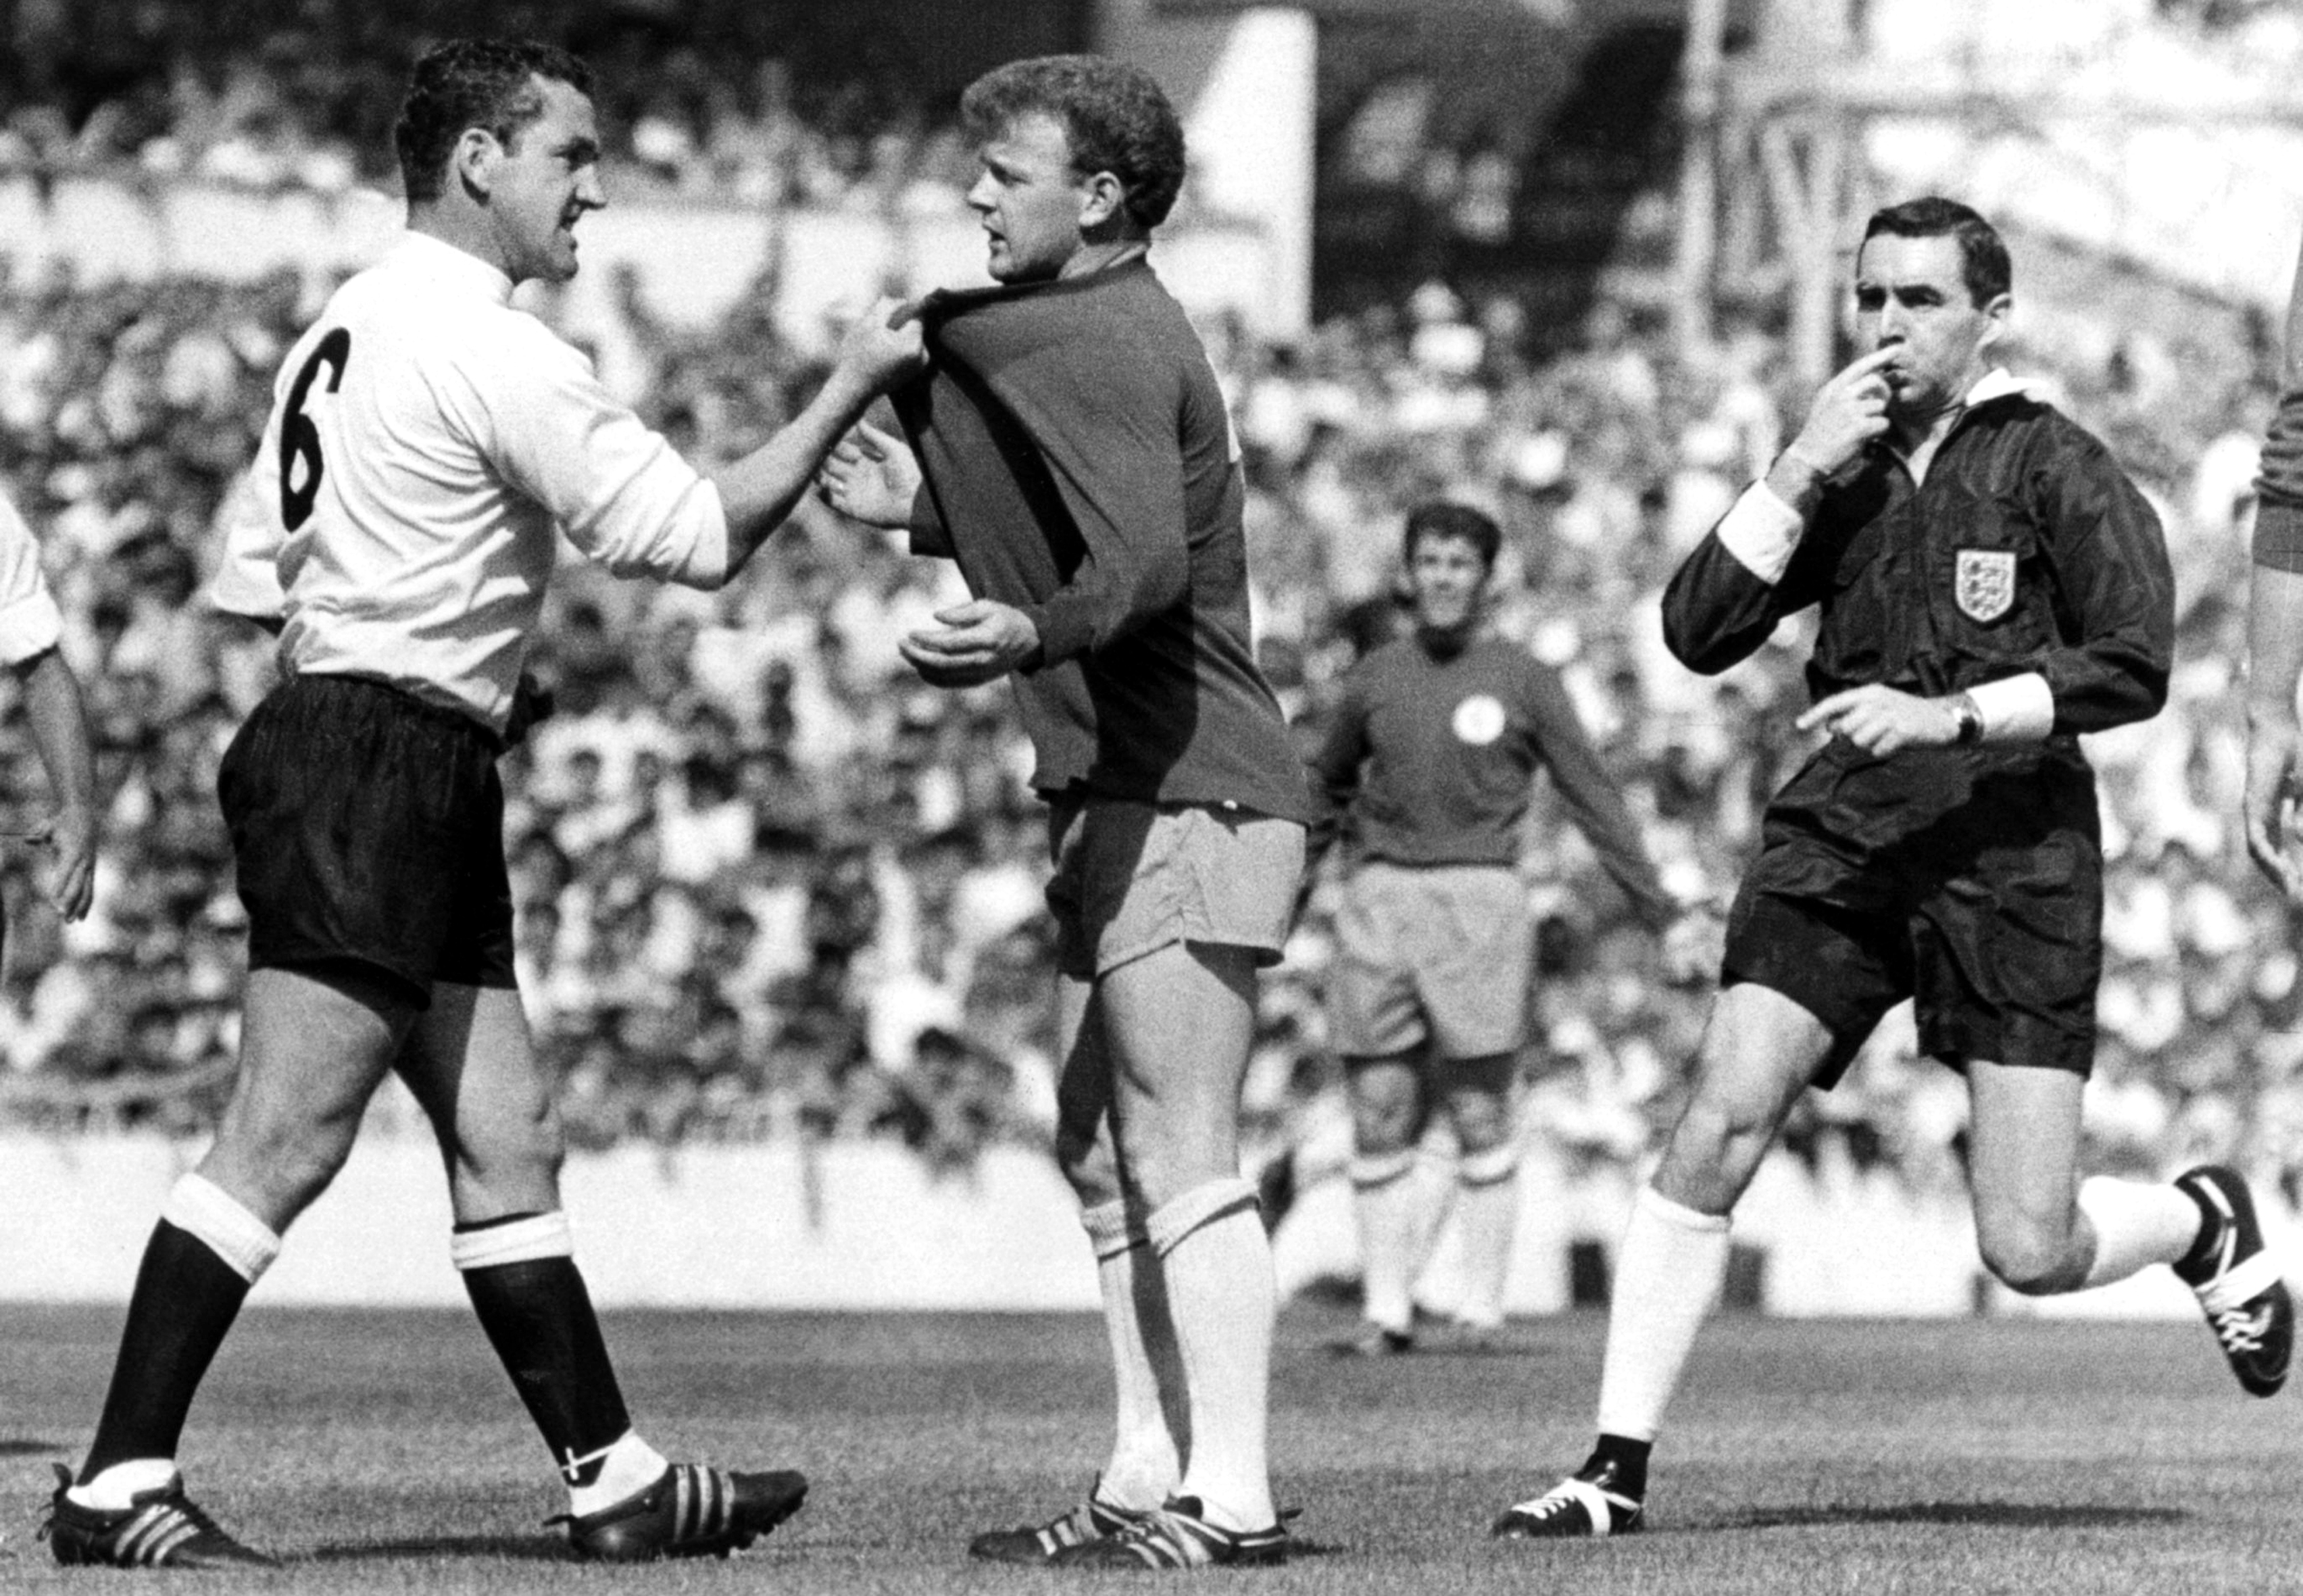 Tottenham's Dave Mackay grabs Leeds' Billy Bremner by the shirt in a famous shot from 1966.